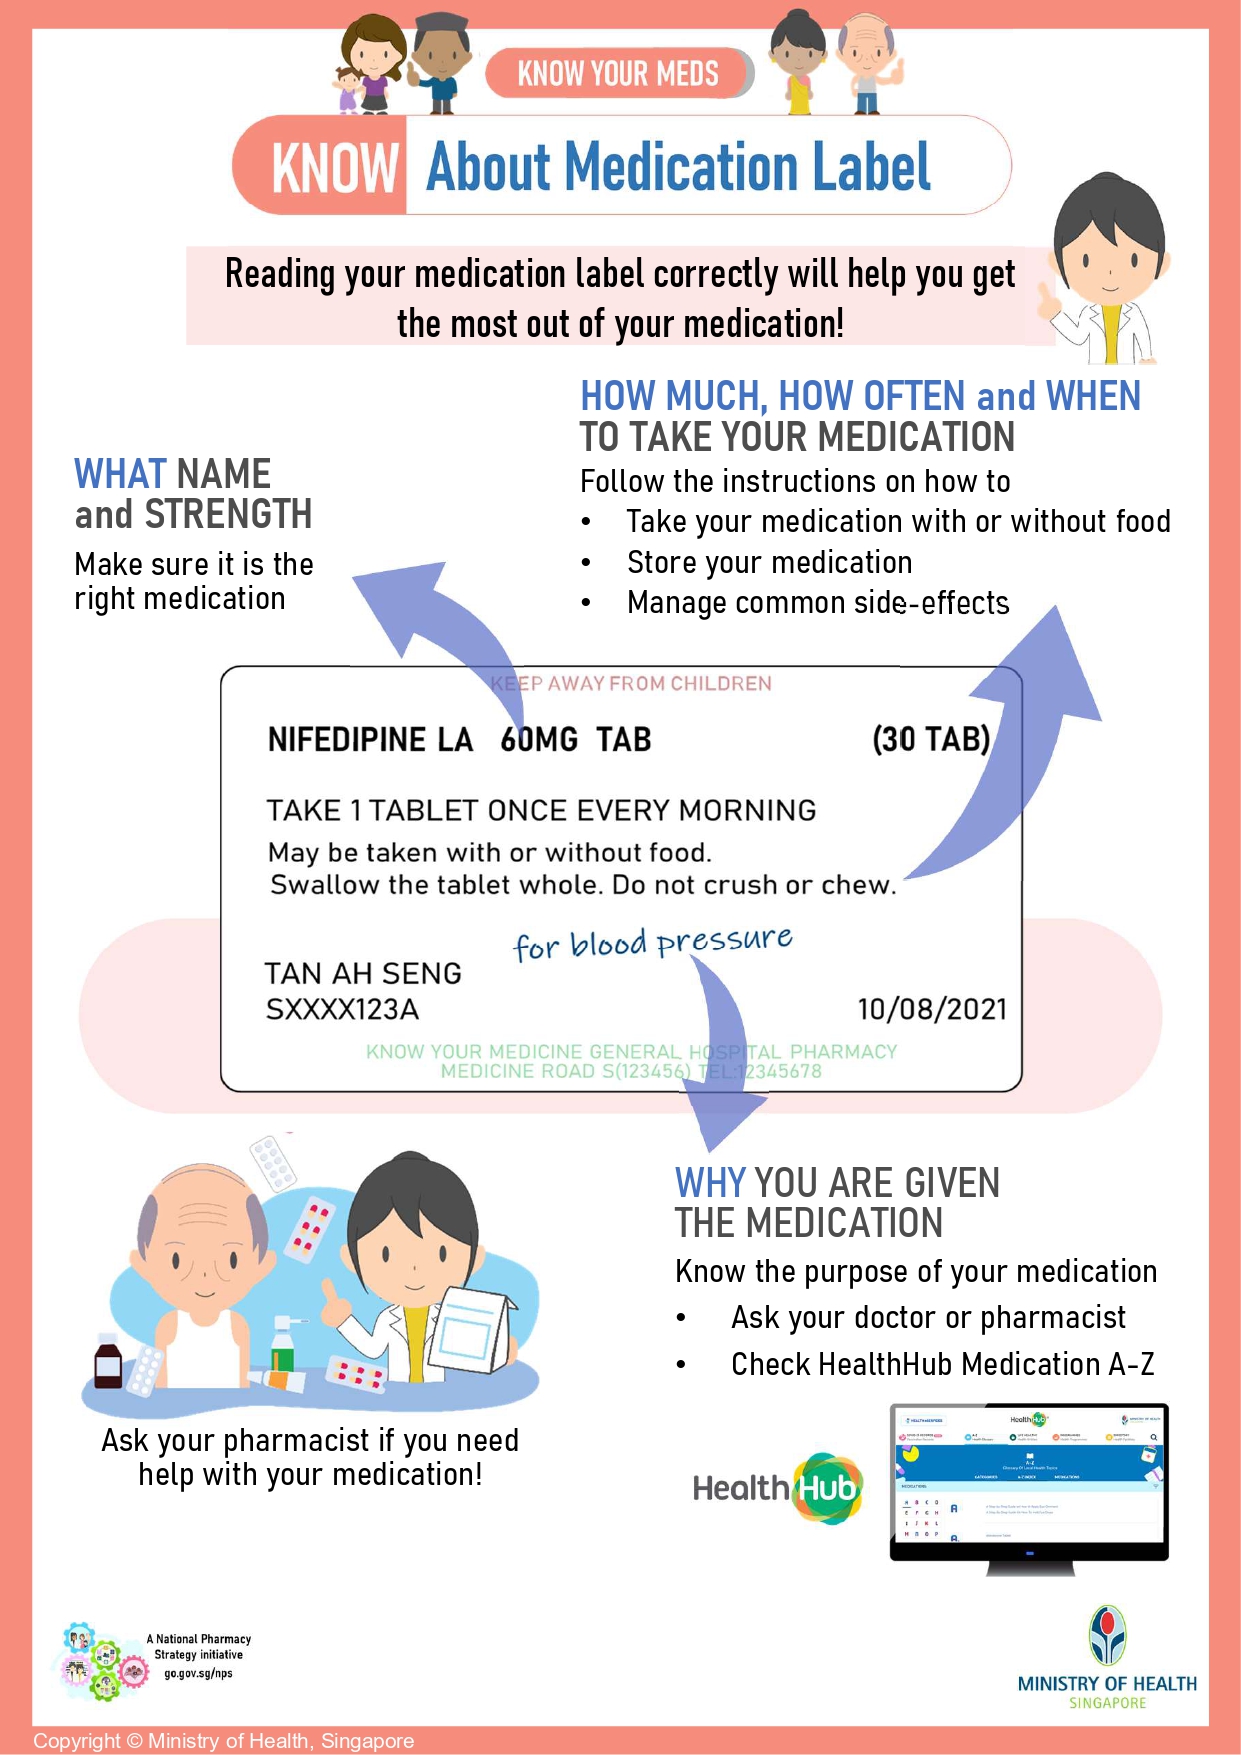 1. Know Your Med Label